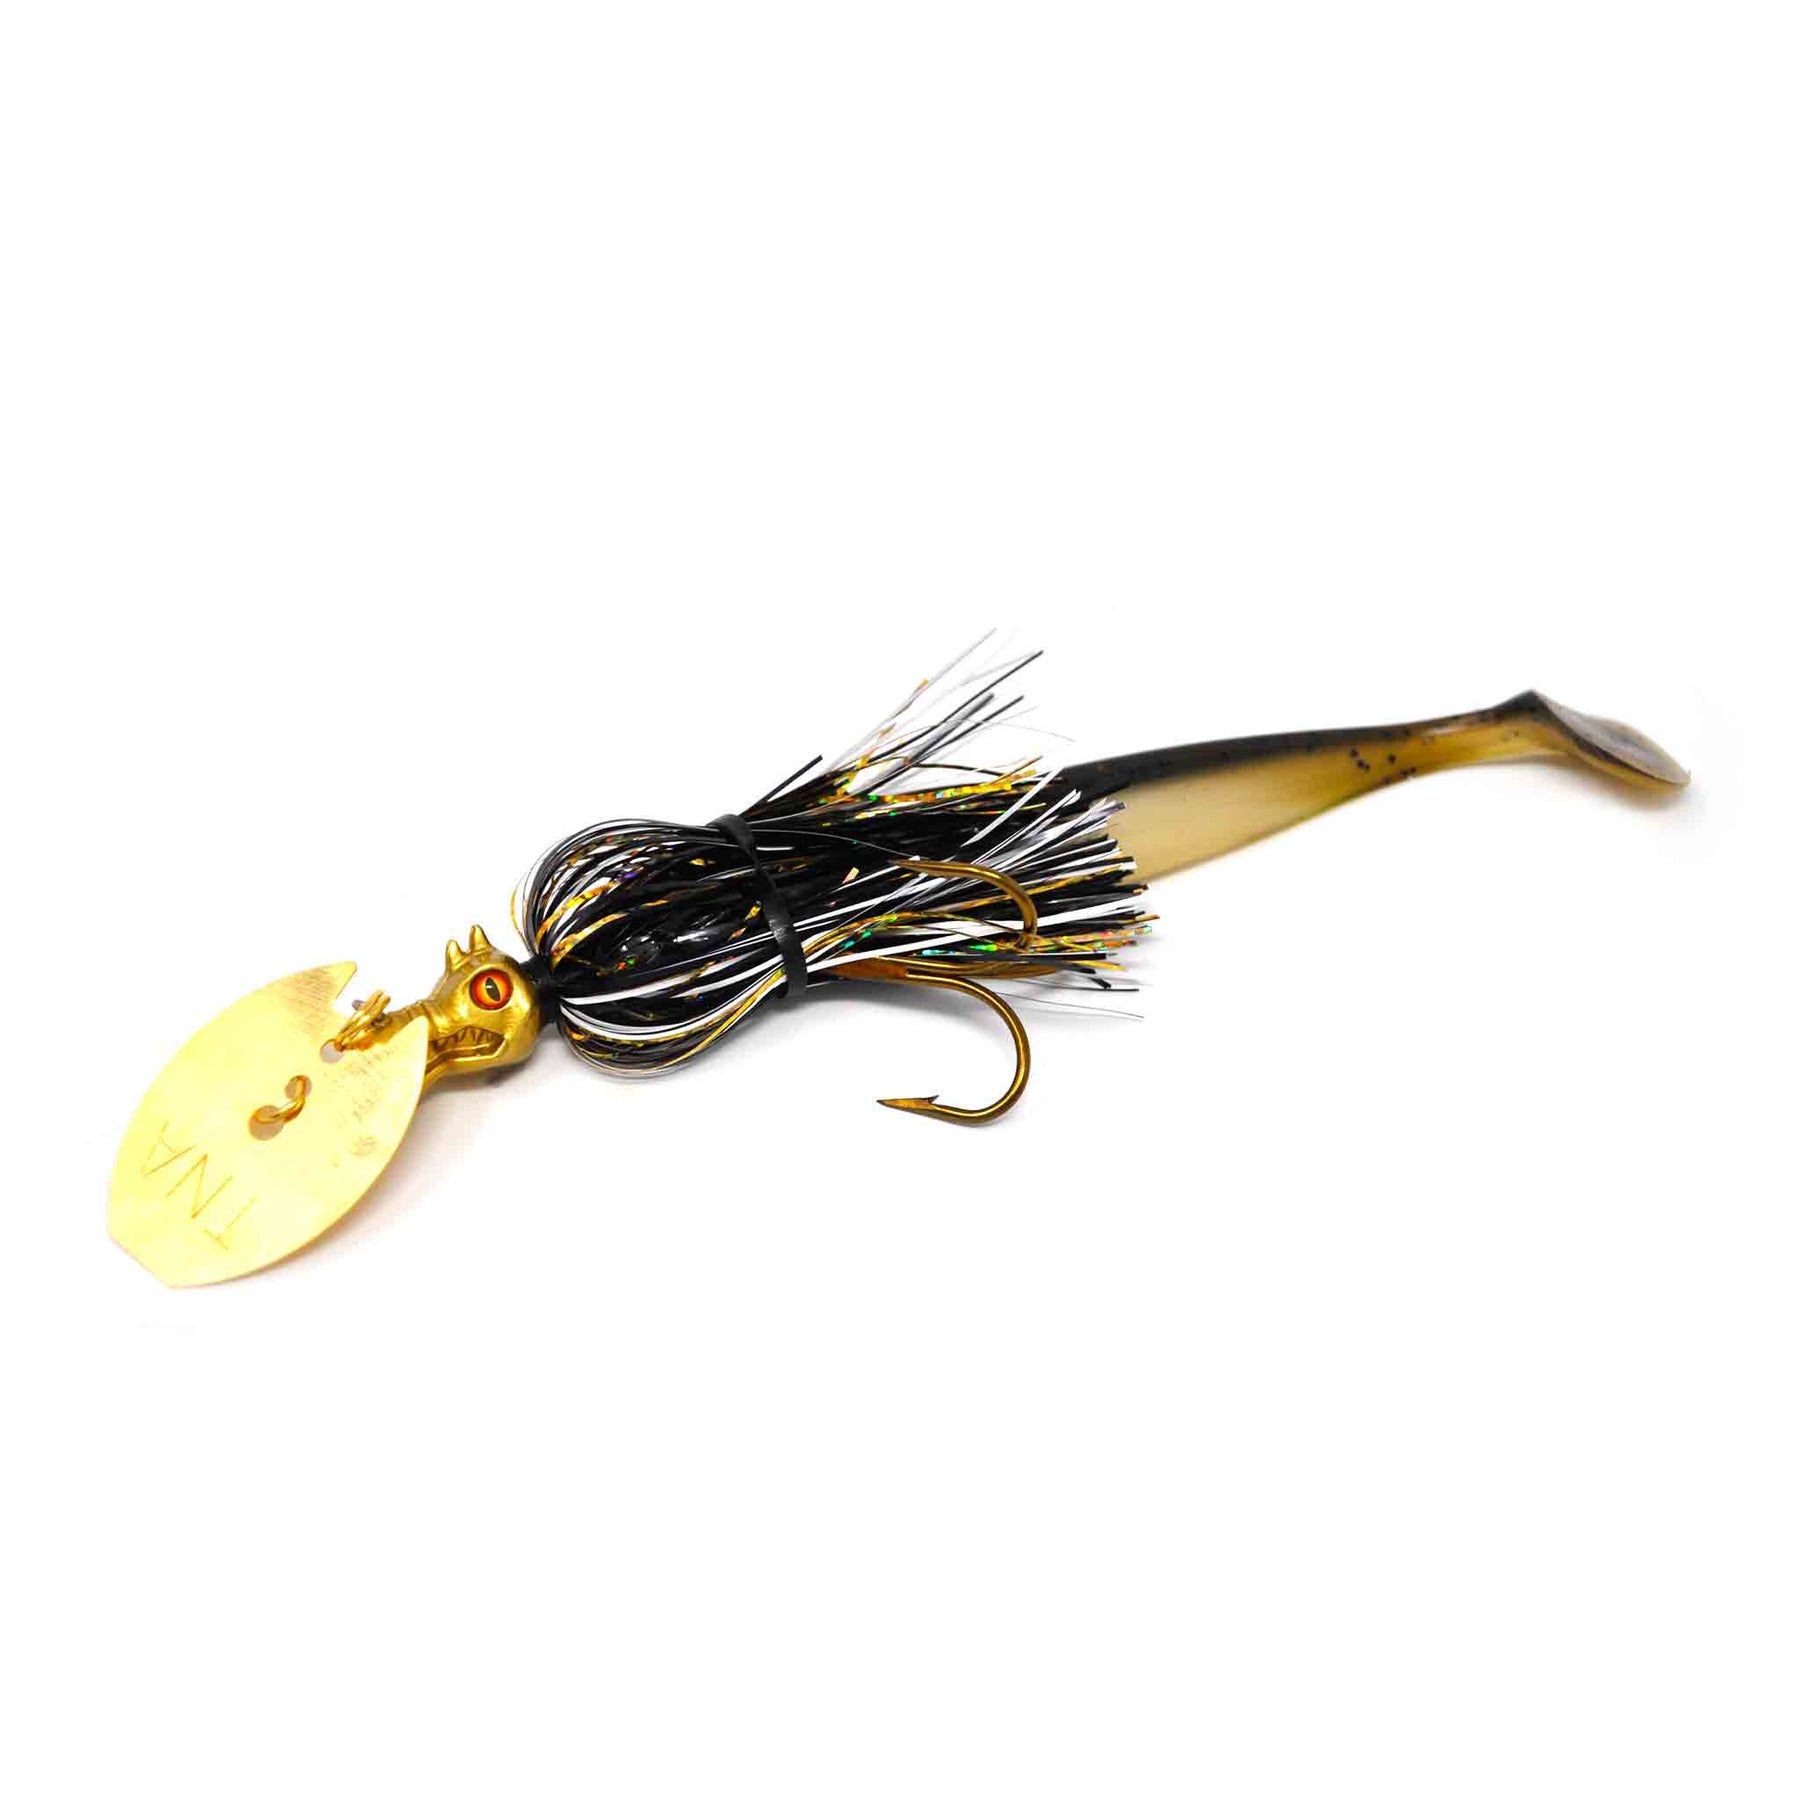 View of Chatterbaits TnA Tackle Micro Waggin Dragon Chatterbait Cleopatra available at EZOKO Pike and Musky Shop